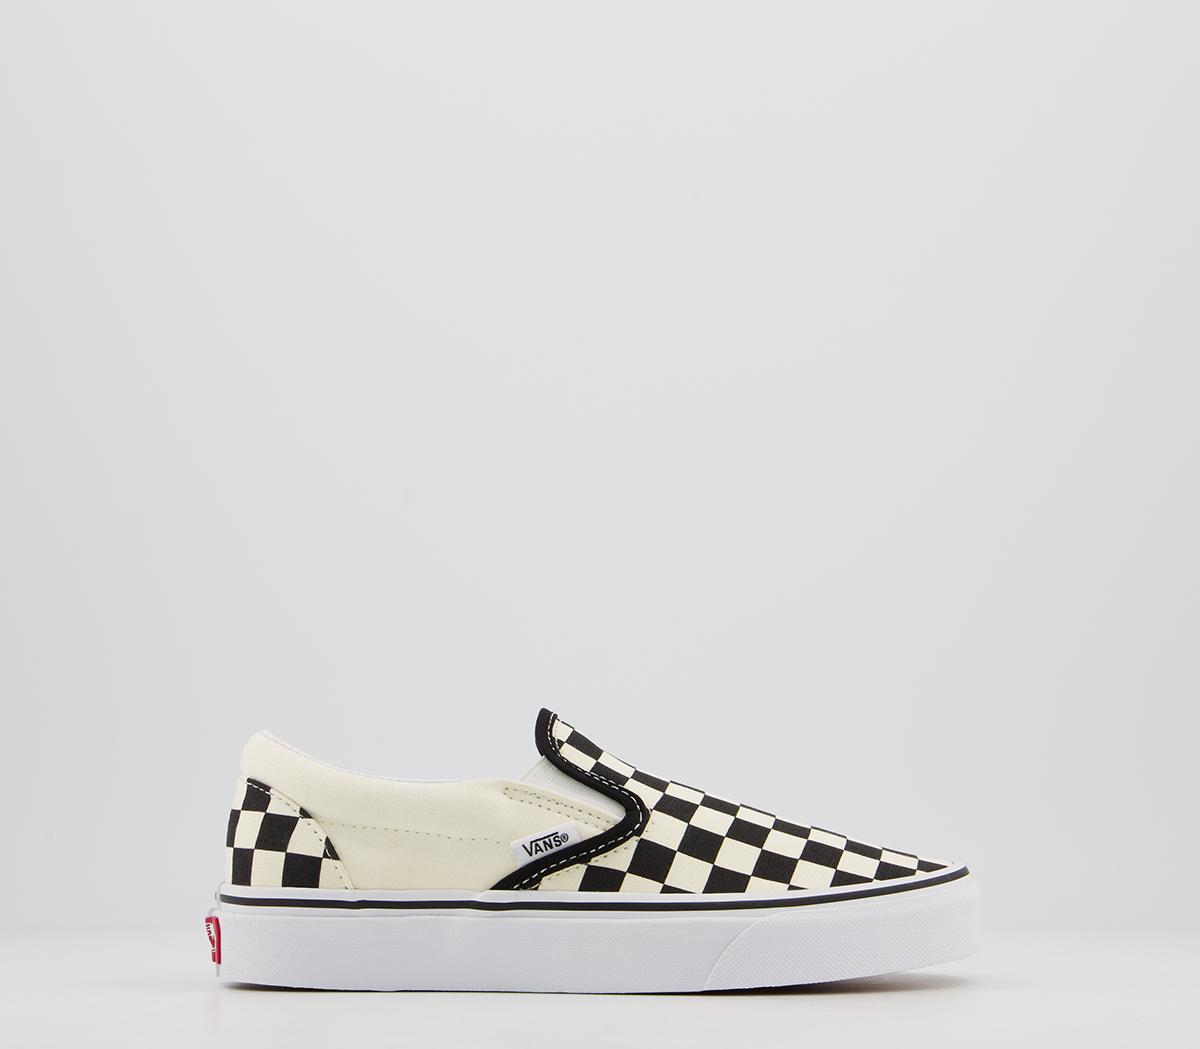 Ferie greb Baron Vans Classic Slip On Trainers Black White Check Fl21 - His trainers